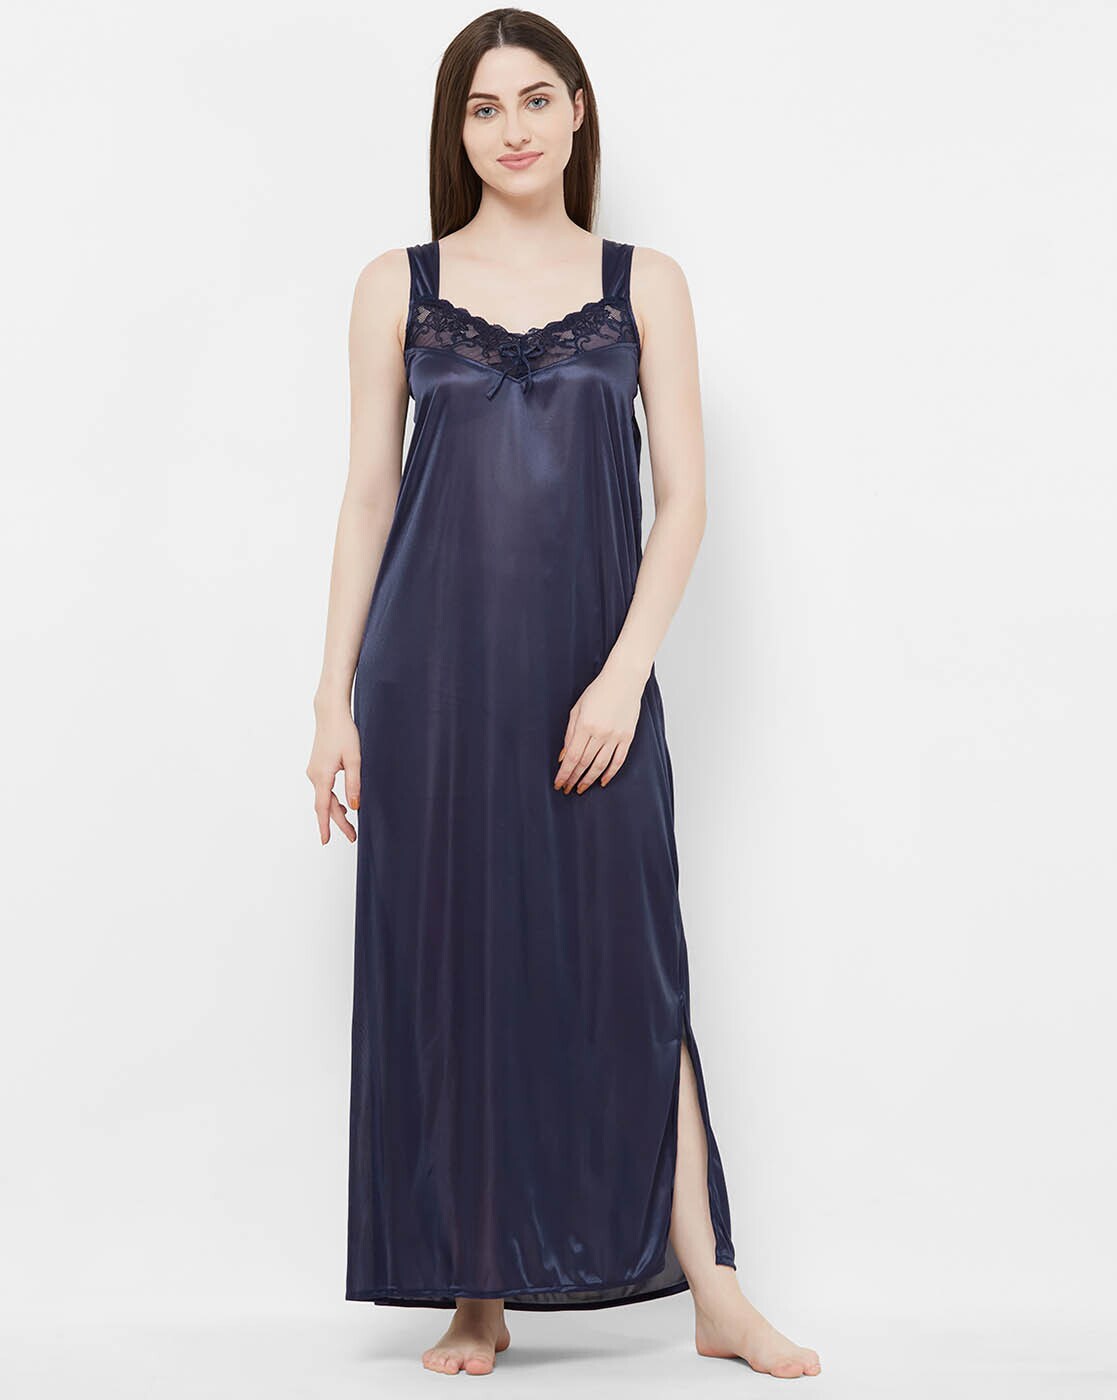 Printed Plain Navy Blue Satin Night Gown, Half Sleeve at Rs 620/piece in  Bengaluru